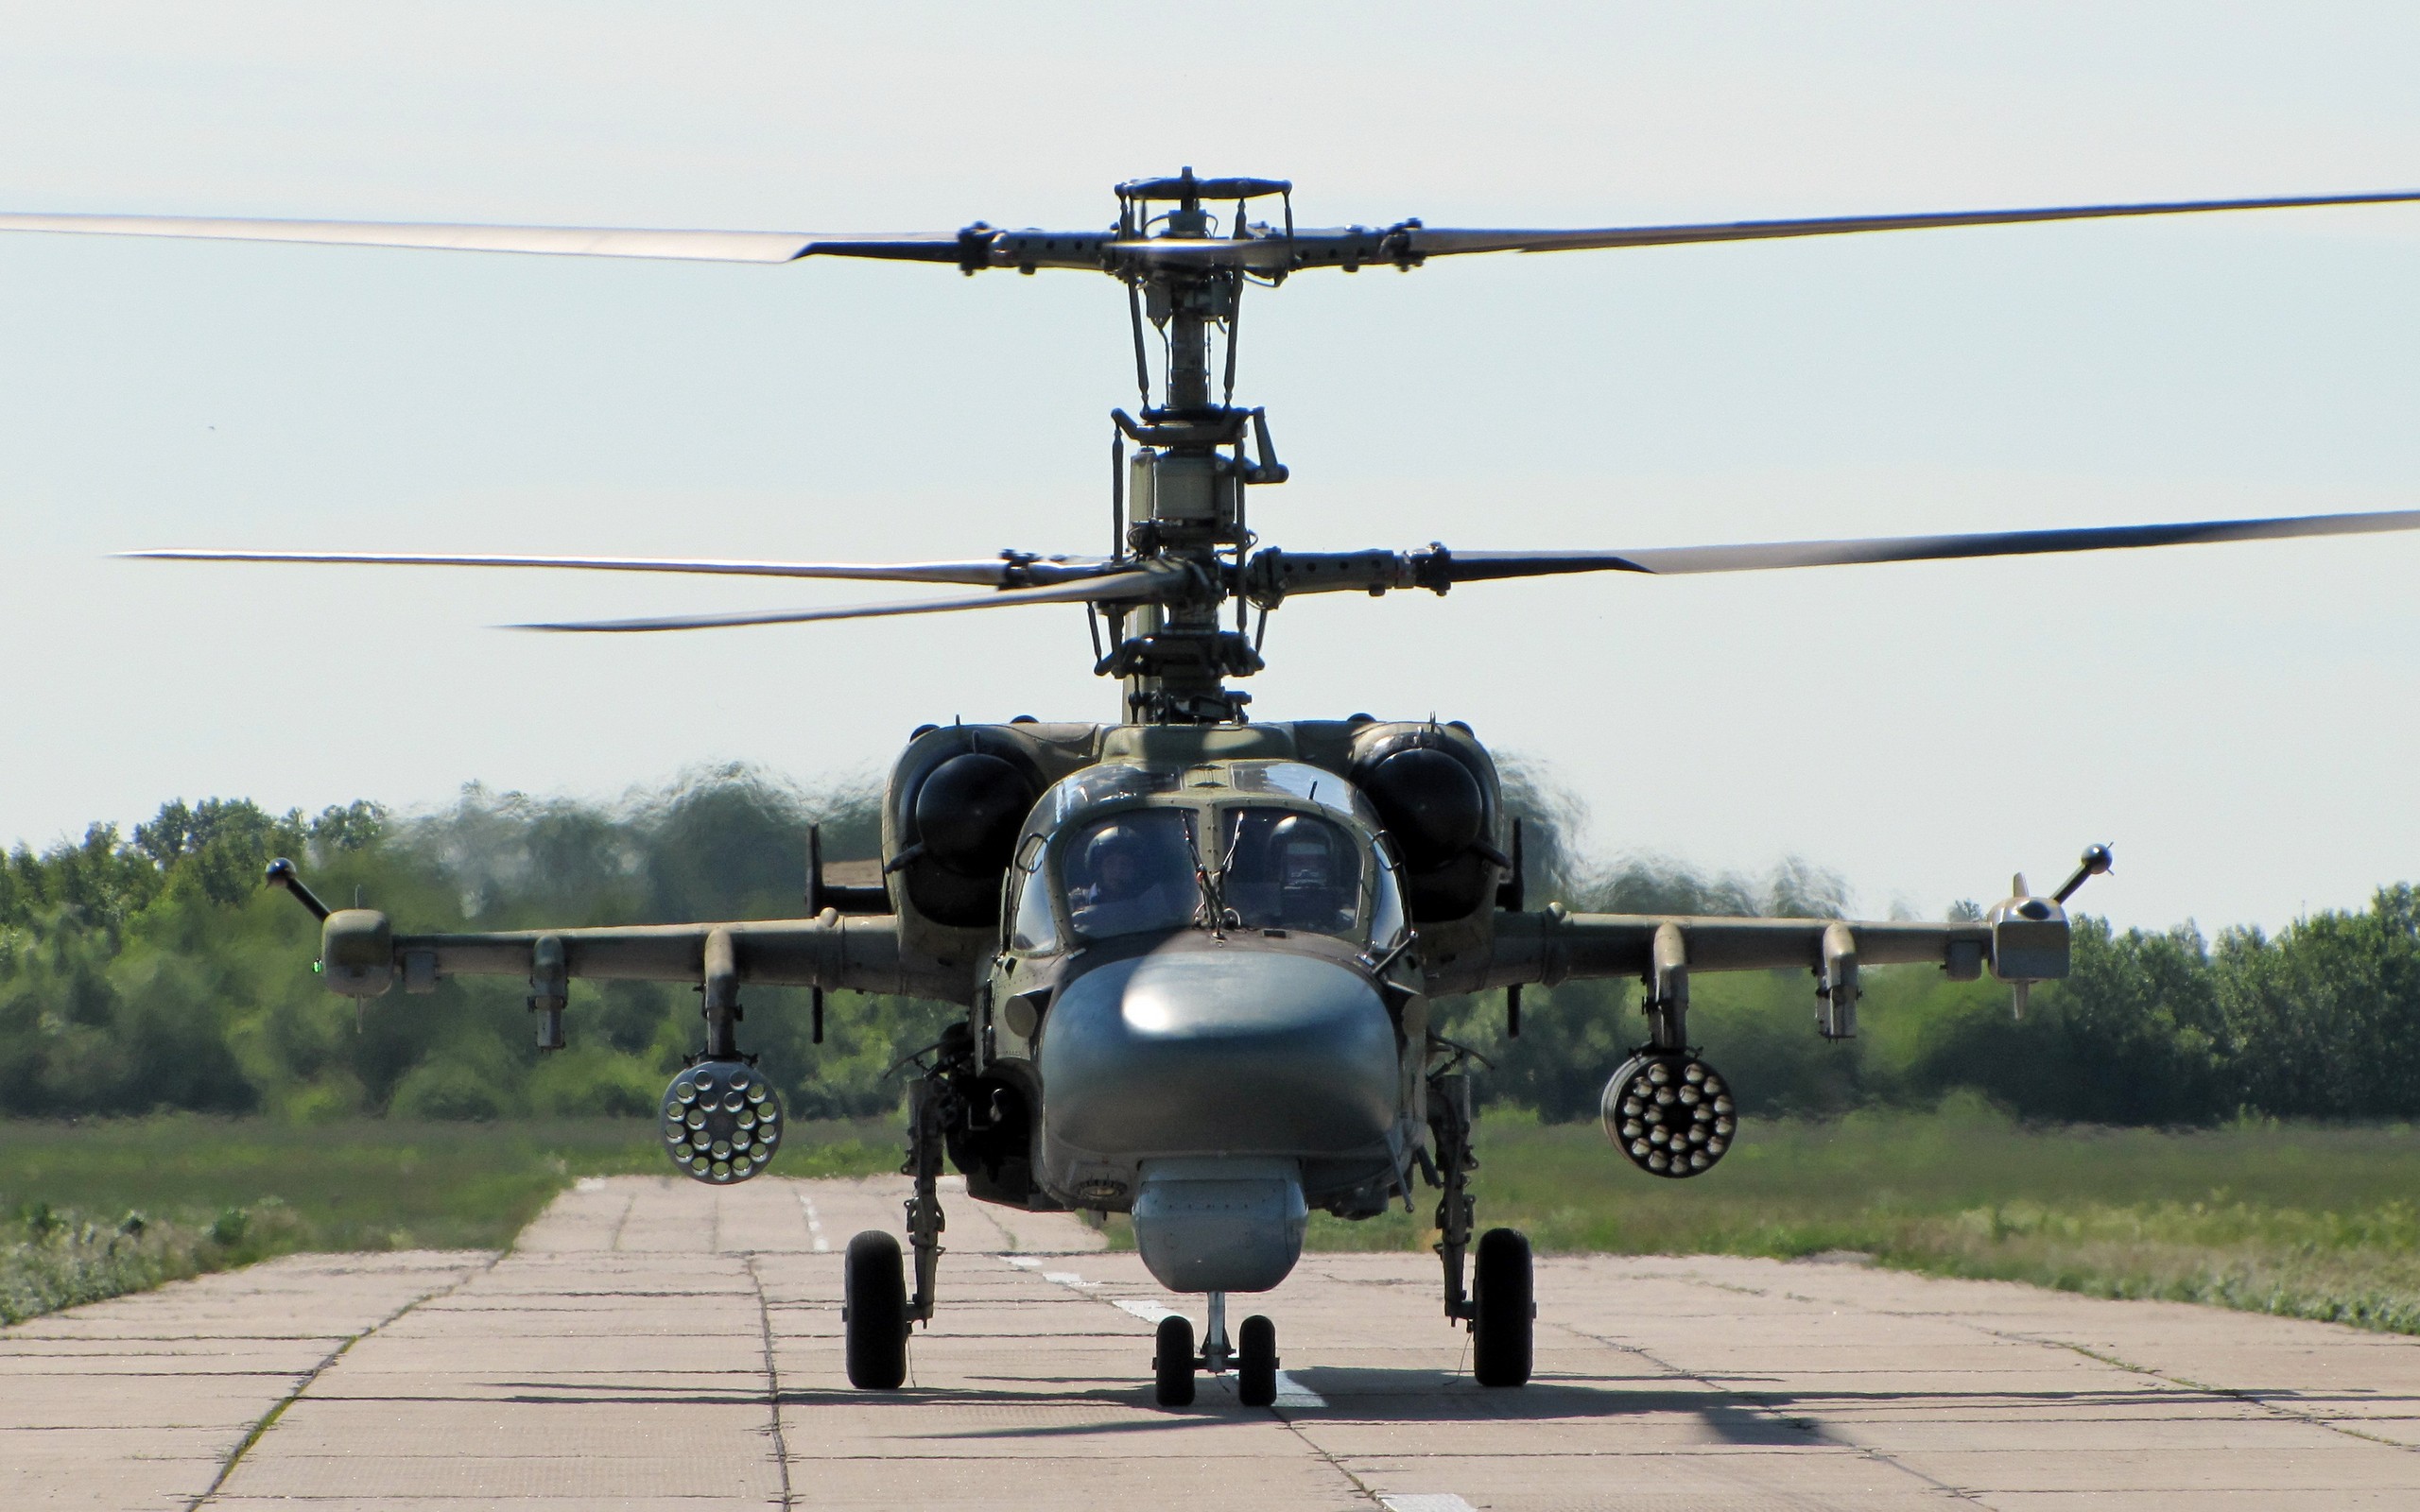 General 2560x1600 aircraft military helicopters Kamov Ka-52 frontal view military vehicle vehicle military aircraft